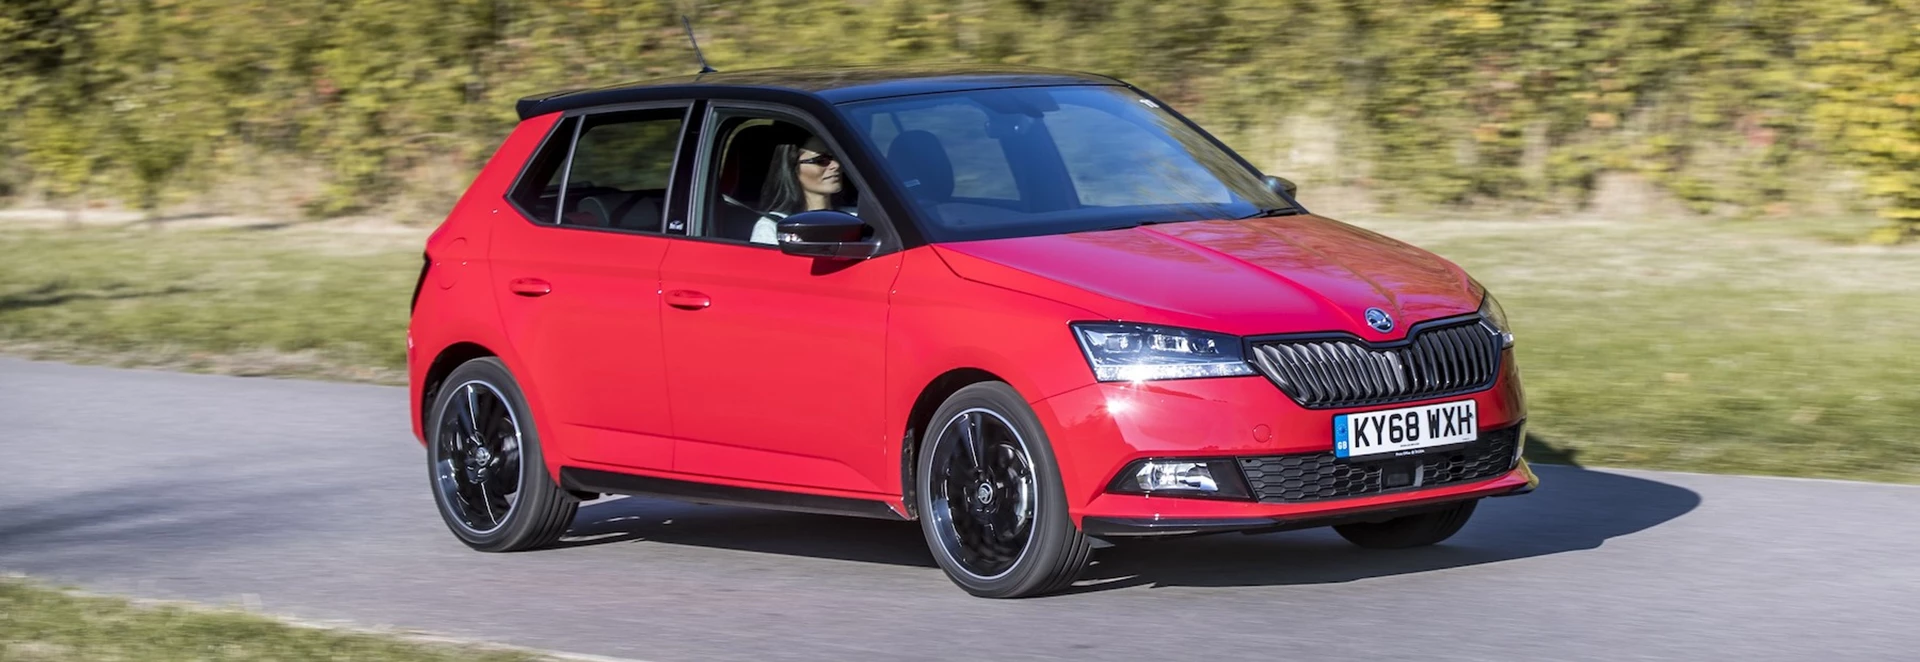 5 reasons why the Skoda Fabia is the ideal supermini 